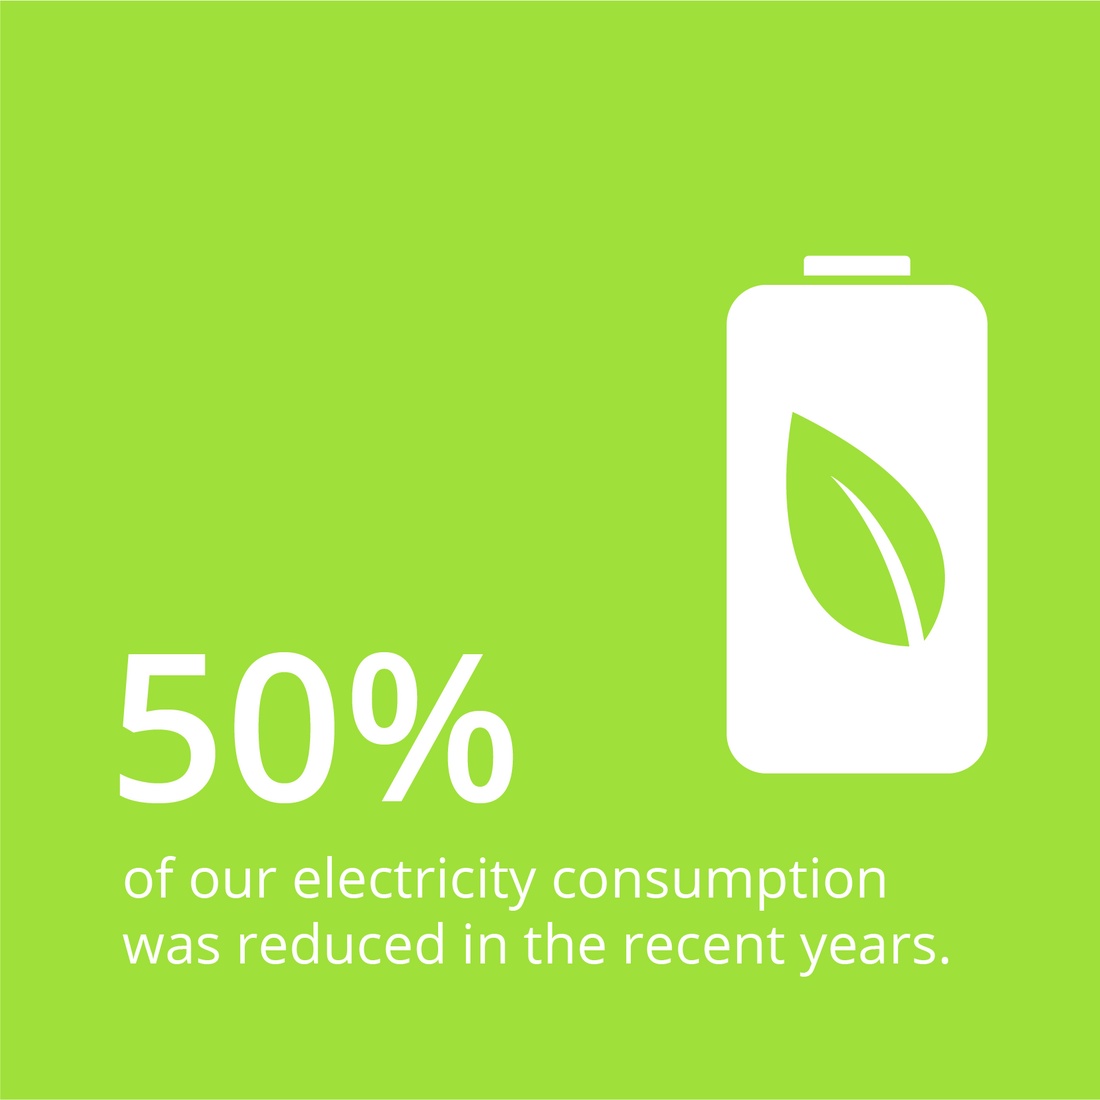 Sustainability: Fast power consumption